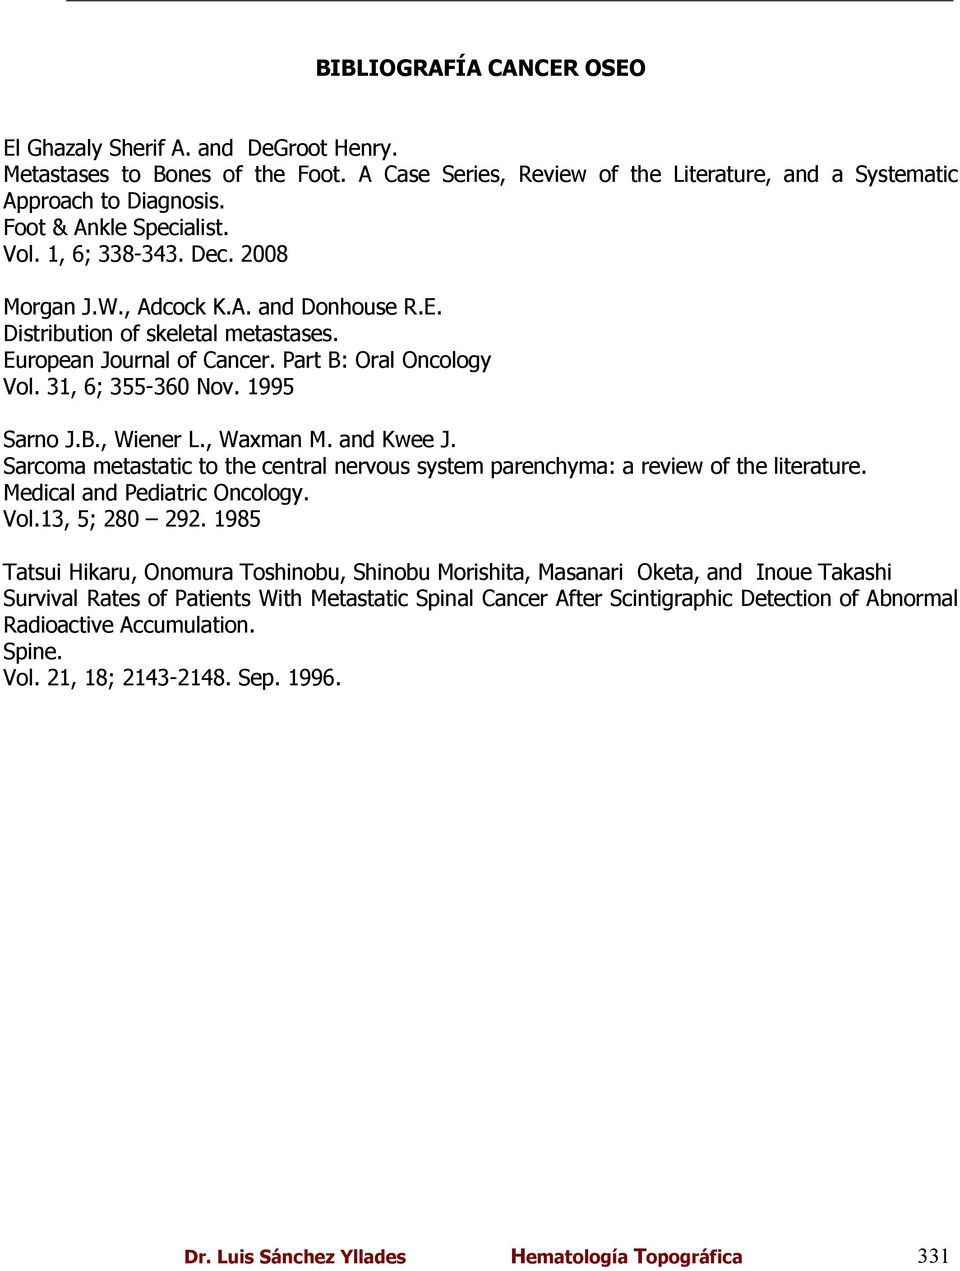 31, 6; 355-36 Nov. 1995 Sarno J.B., Wiener L., Waxman M. and Kwee J. Sarcoma metastatic to the central nervous system parenchyma: a review of the literature. Medical and Pediatric Oncology. Vol.